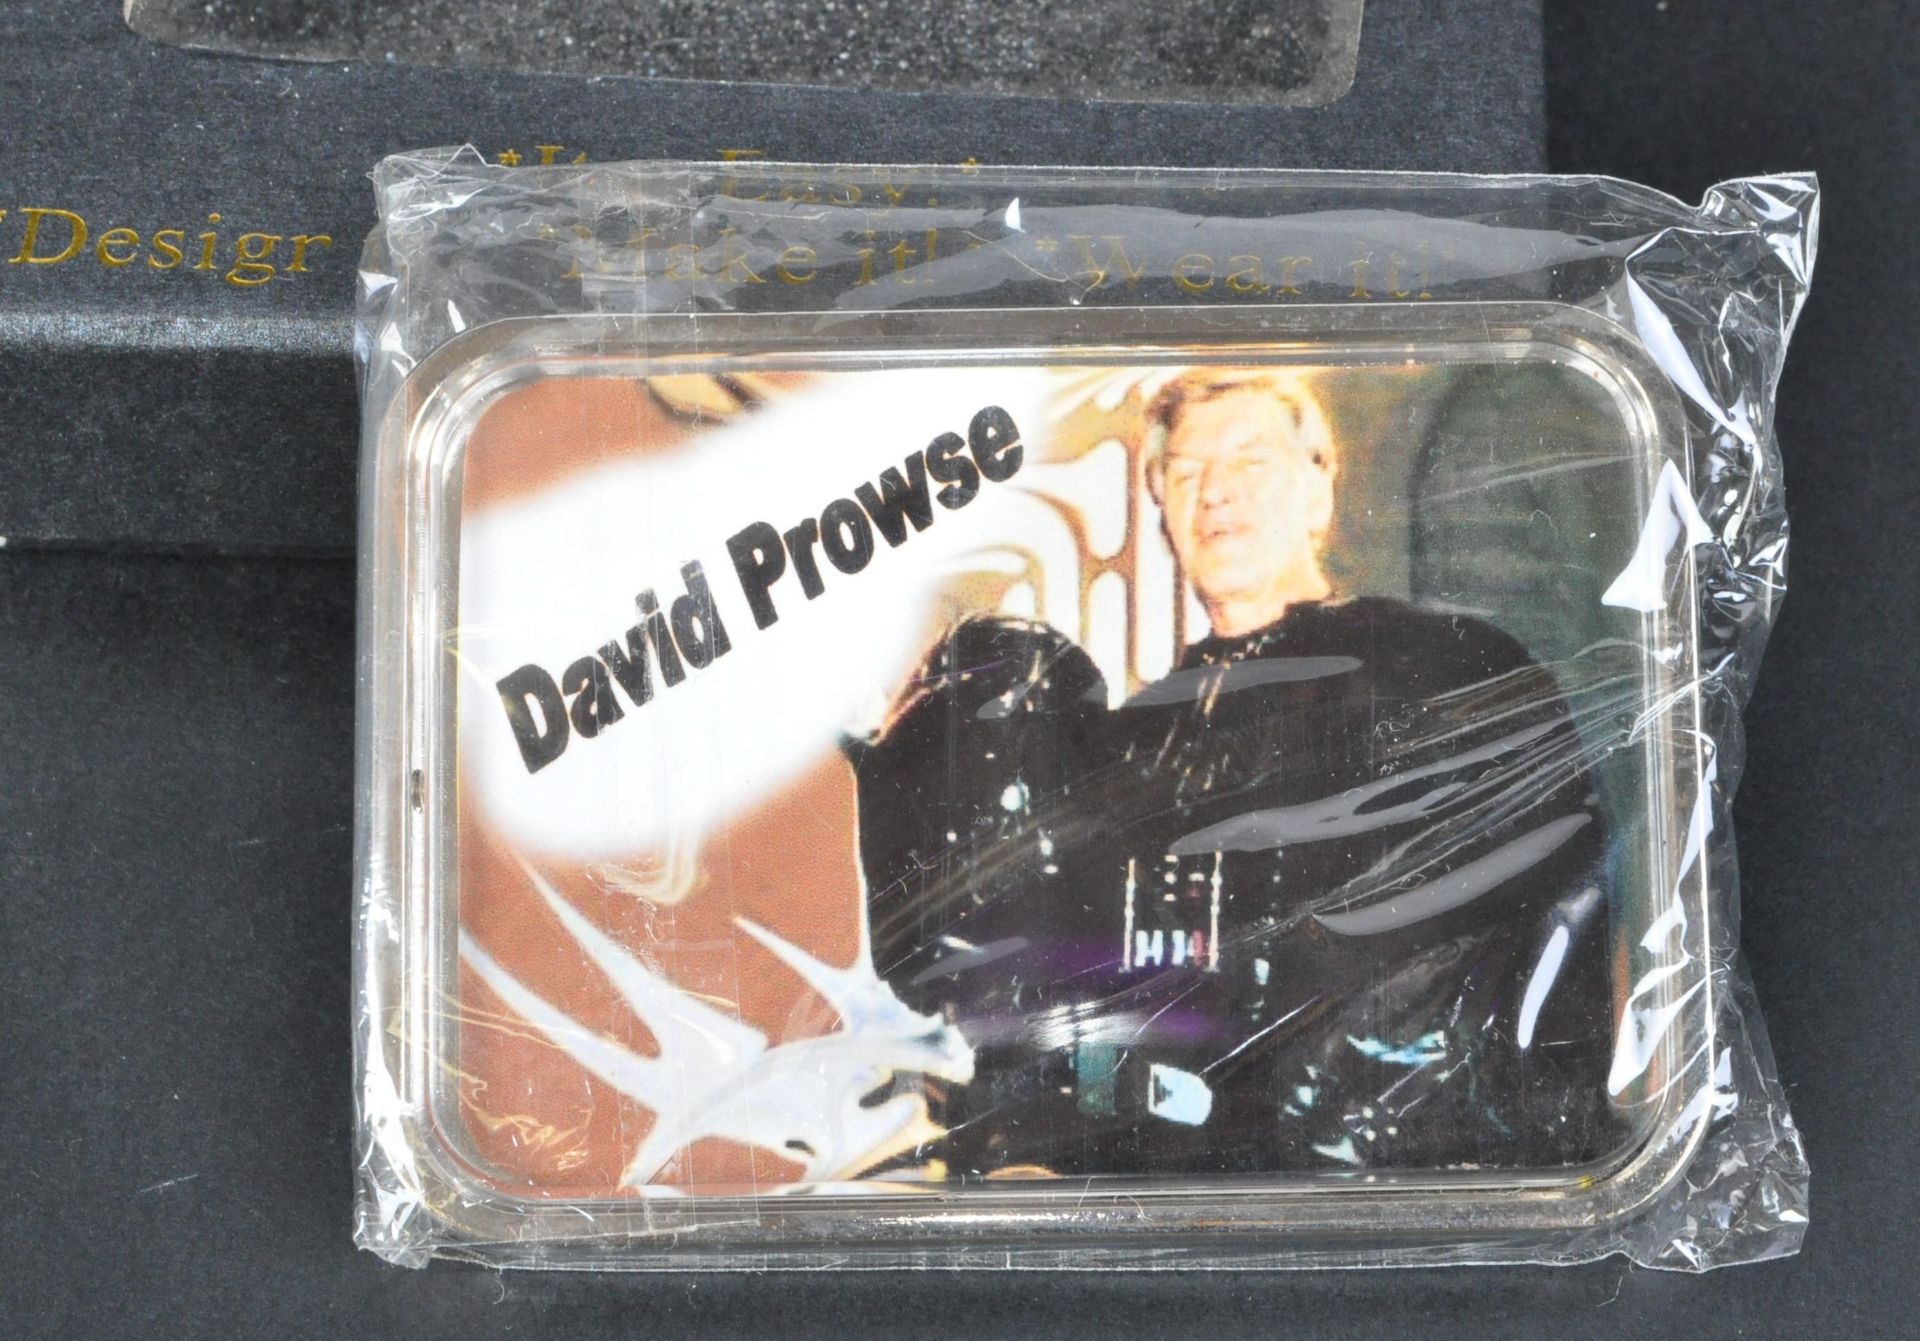 ESTATE OF DAVE PROWSE - FAN GIFT PICTURE BELT BUCKLE - Image 2 of 4